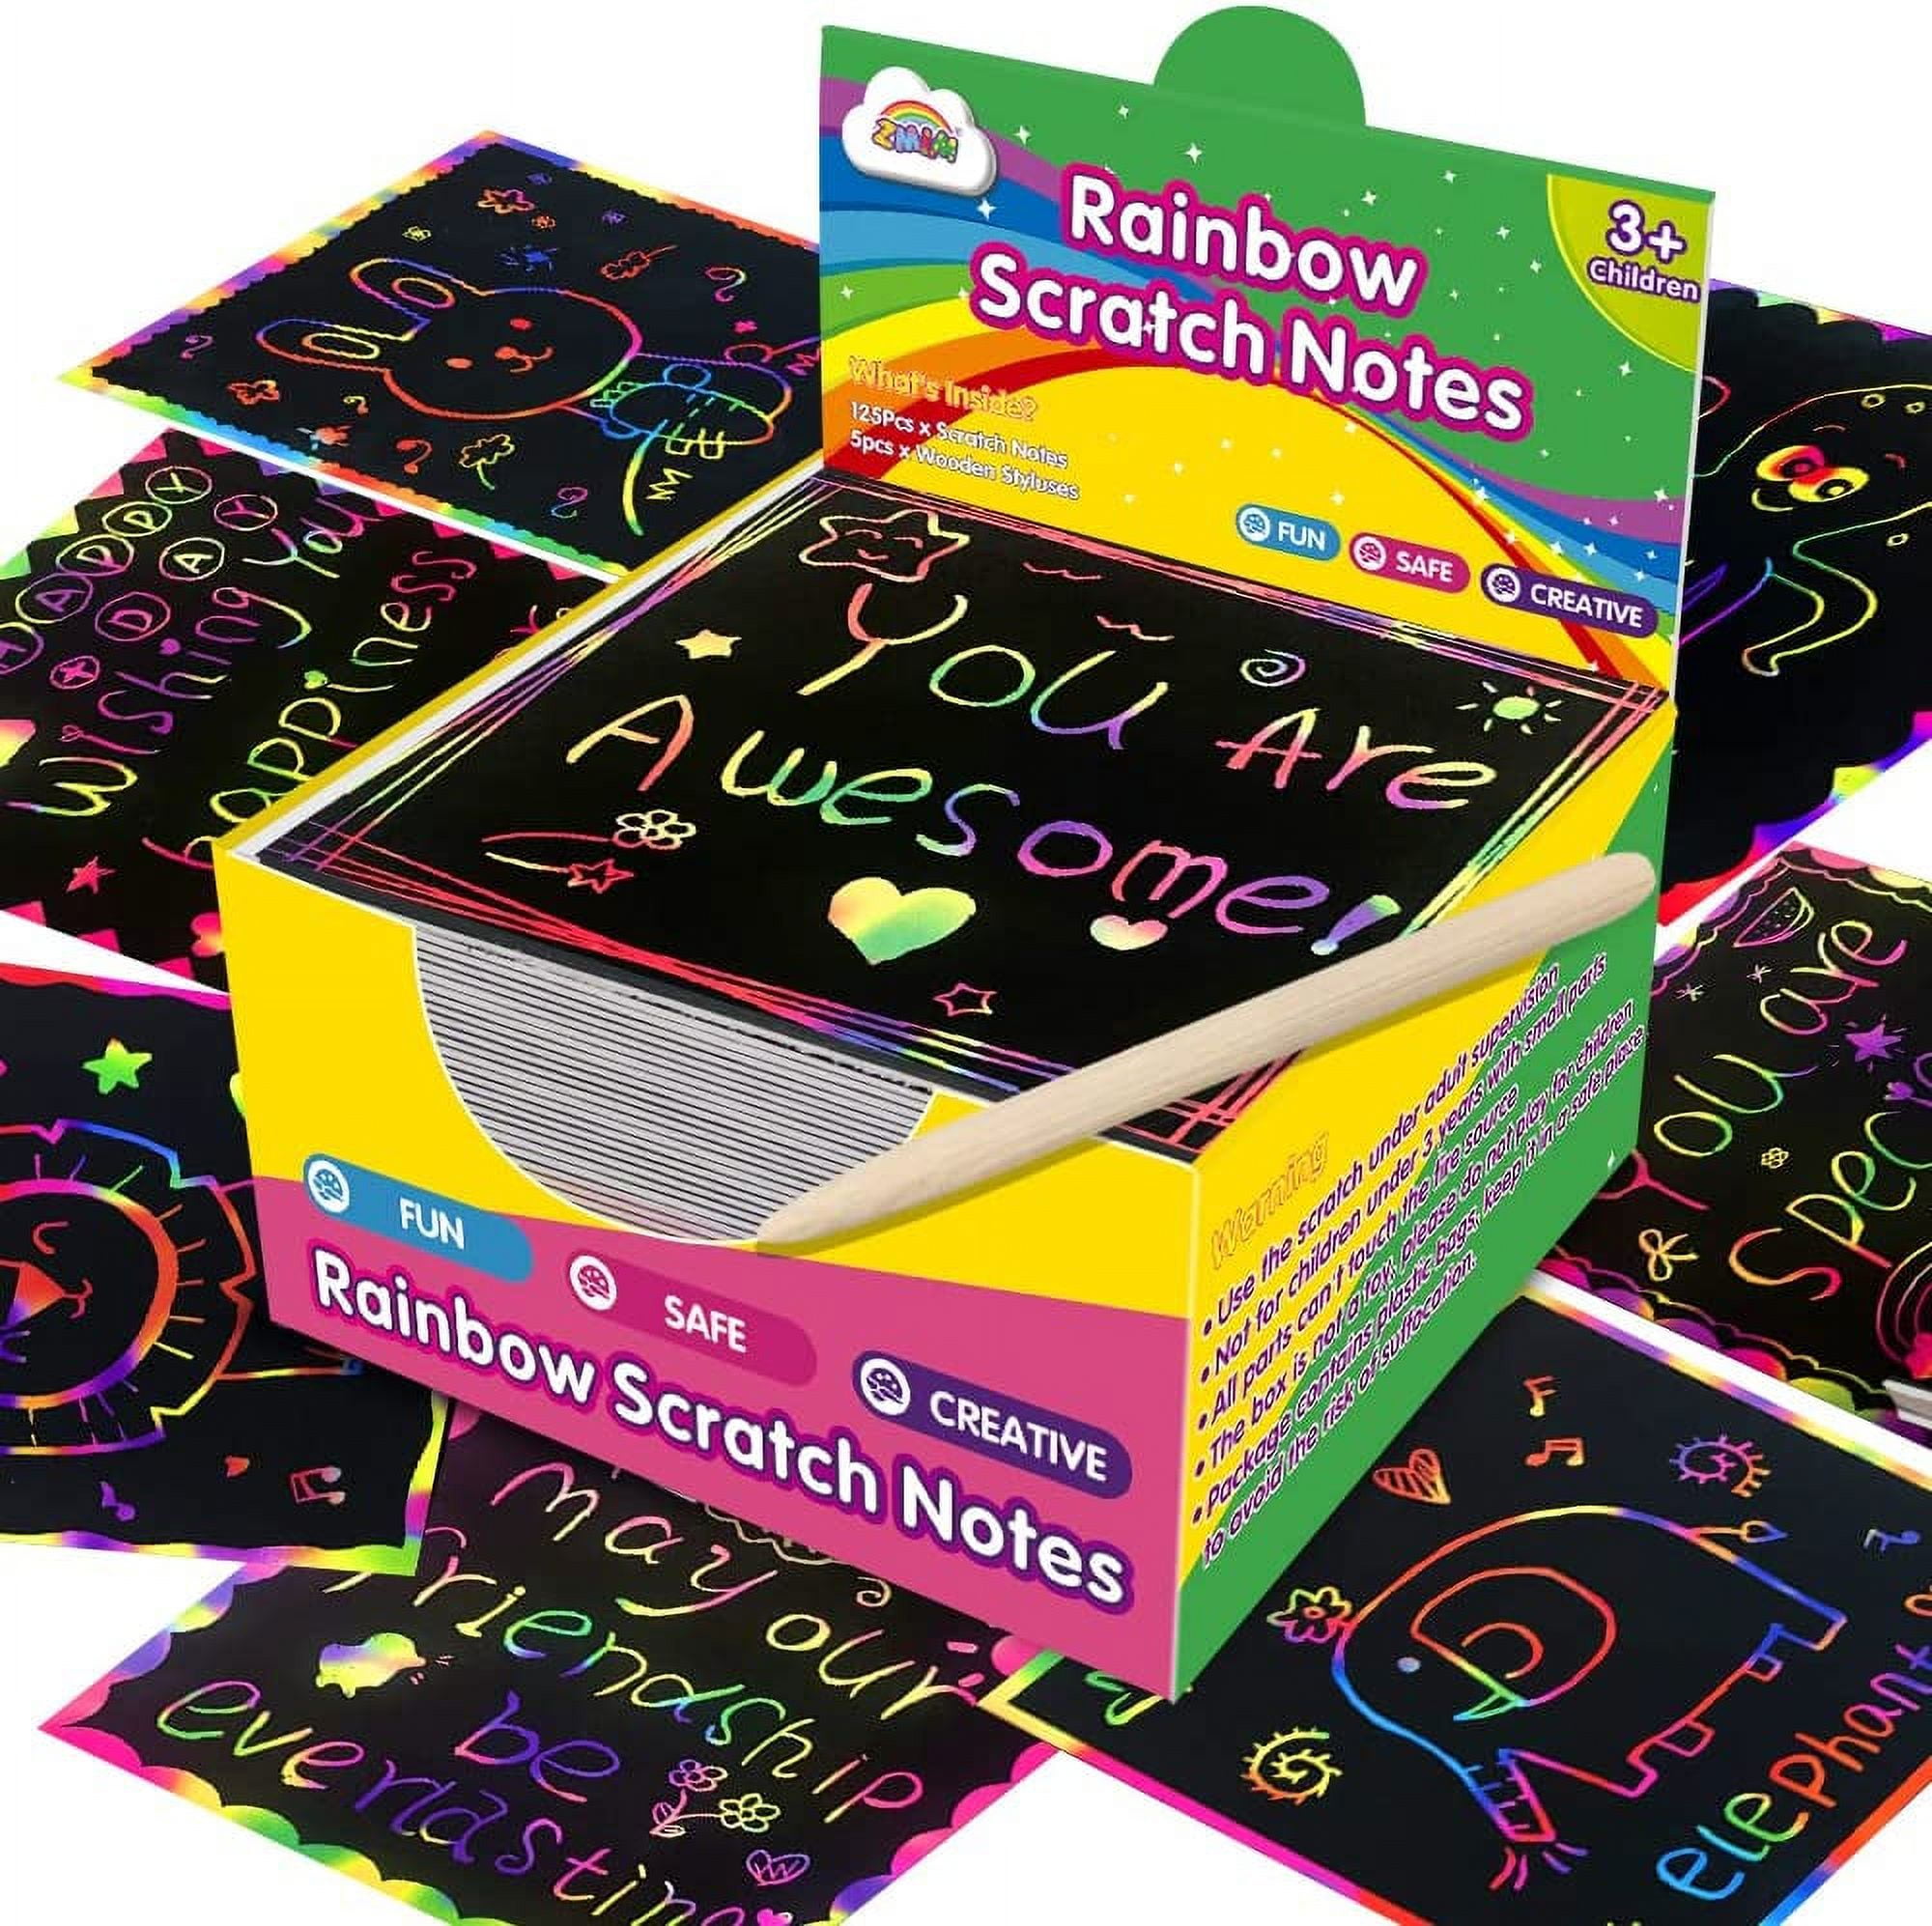 ZMLM Scratch Paper Art Notebooks - Rainbow Scratch Off Art Set for Kids Activity Coloring Book Drawing Pad Black Magic Art Craft Supplies Kits for